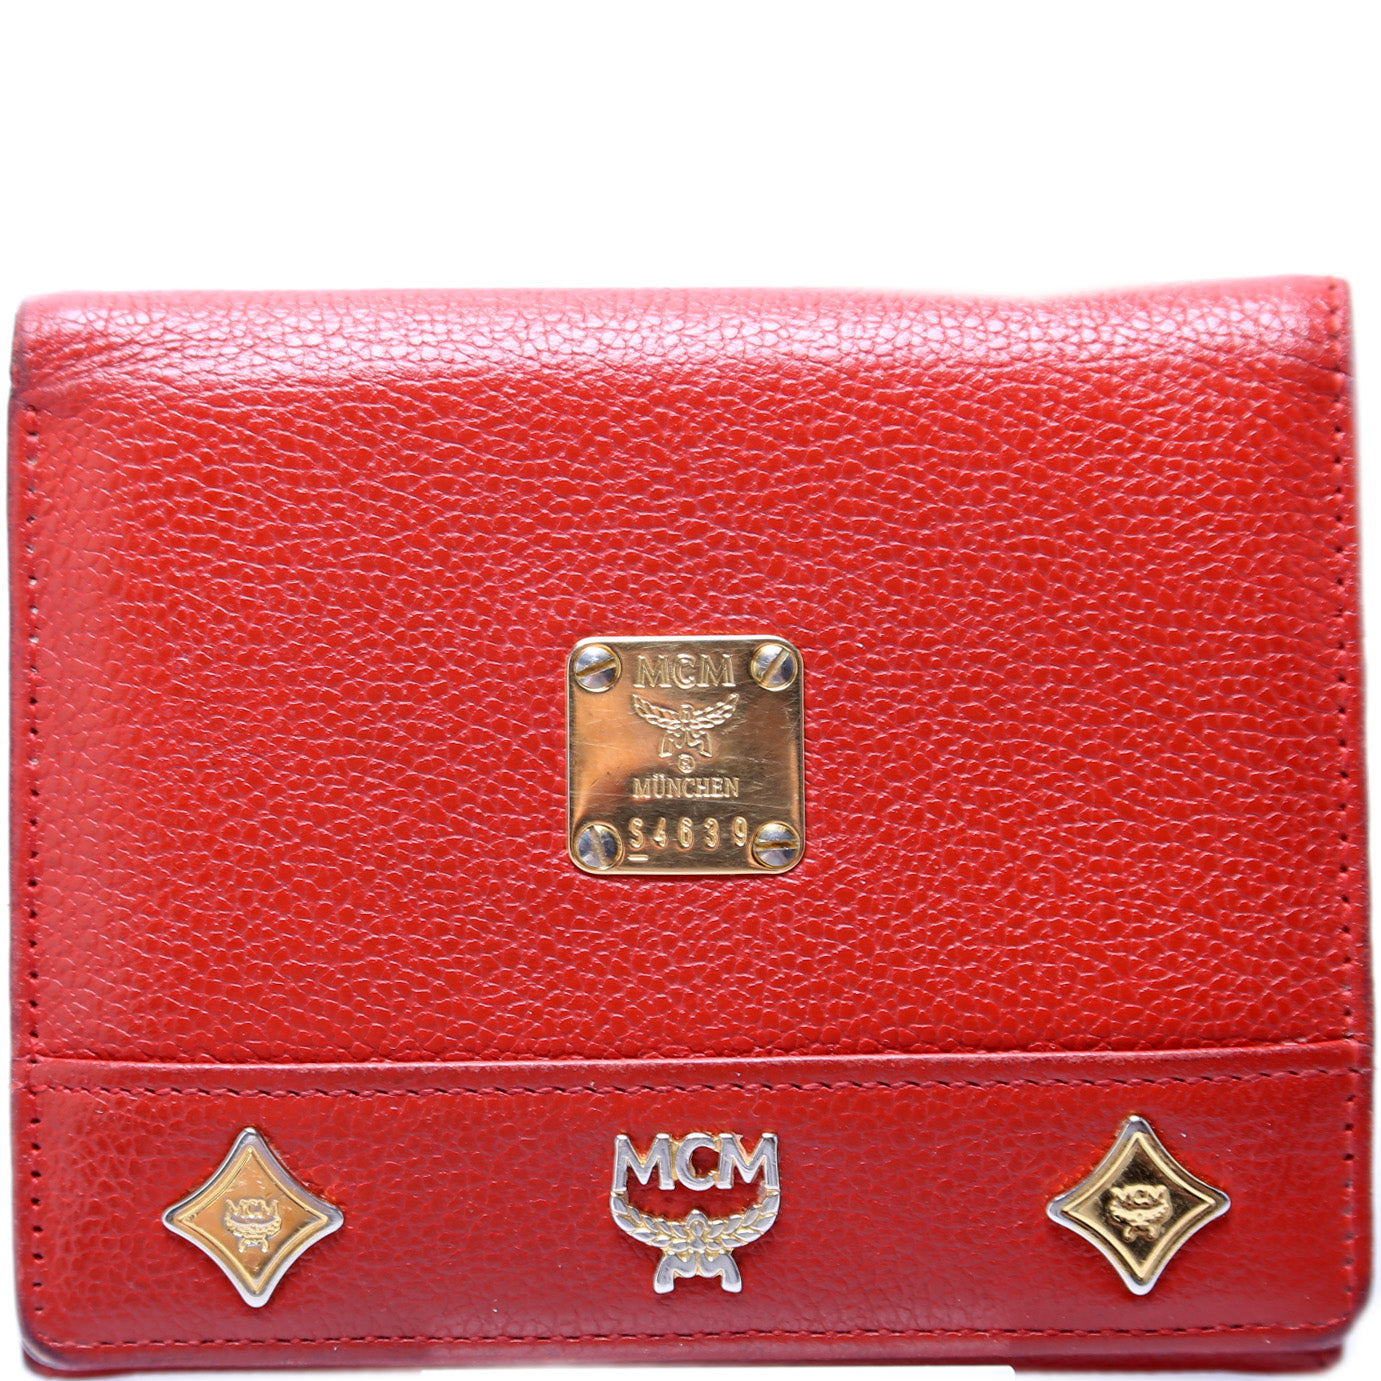 Compact Wallet w/Coin Triomphe Leather – Keeks Designer Handbags